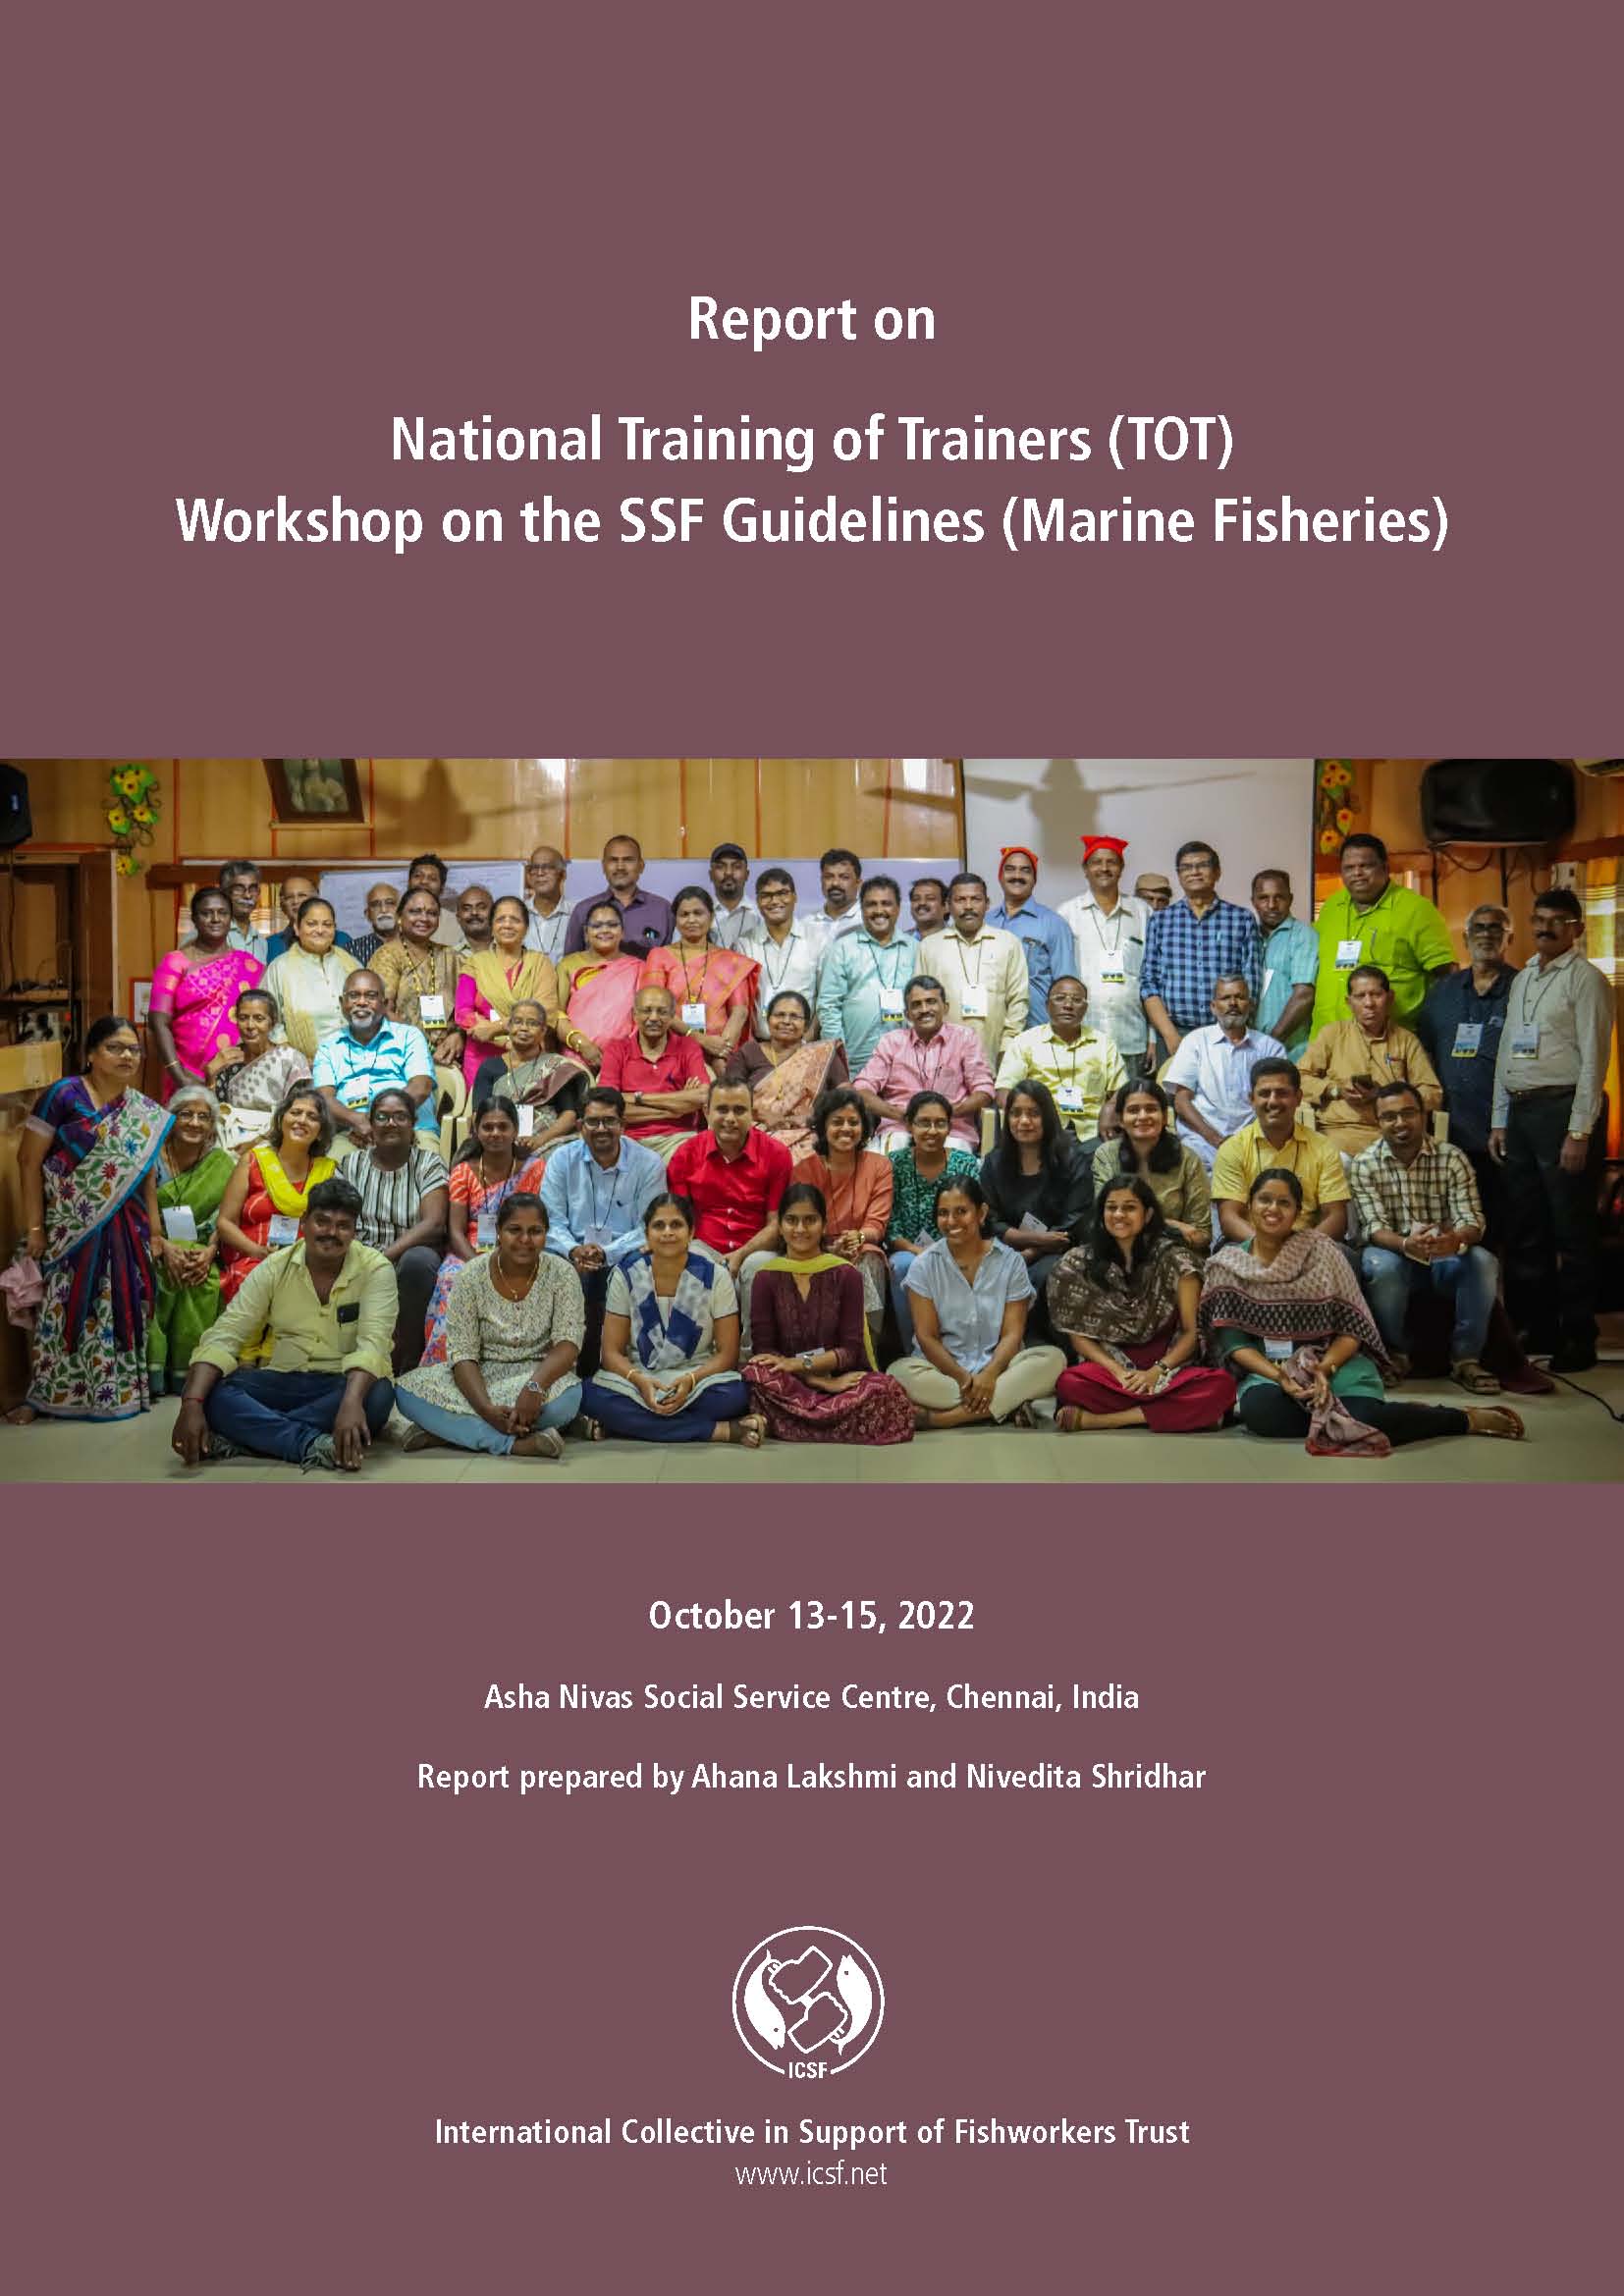 Report on National Training of Trainers (TOT) Workshop on the SSF Guidelines (Marine Fisheries) October 13-15, 2022, Asha Nivas Social Service Centre, Chennai, India by Ahana Lakshmi and Nivedita Shridhar